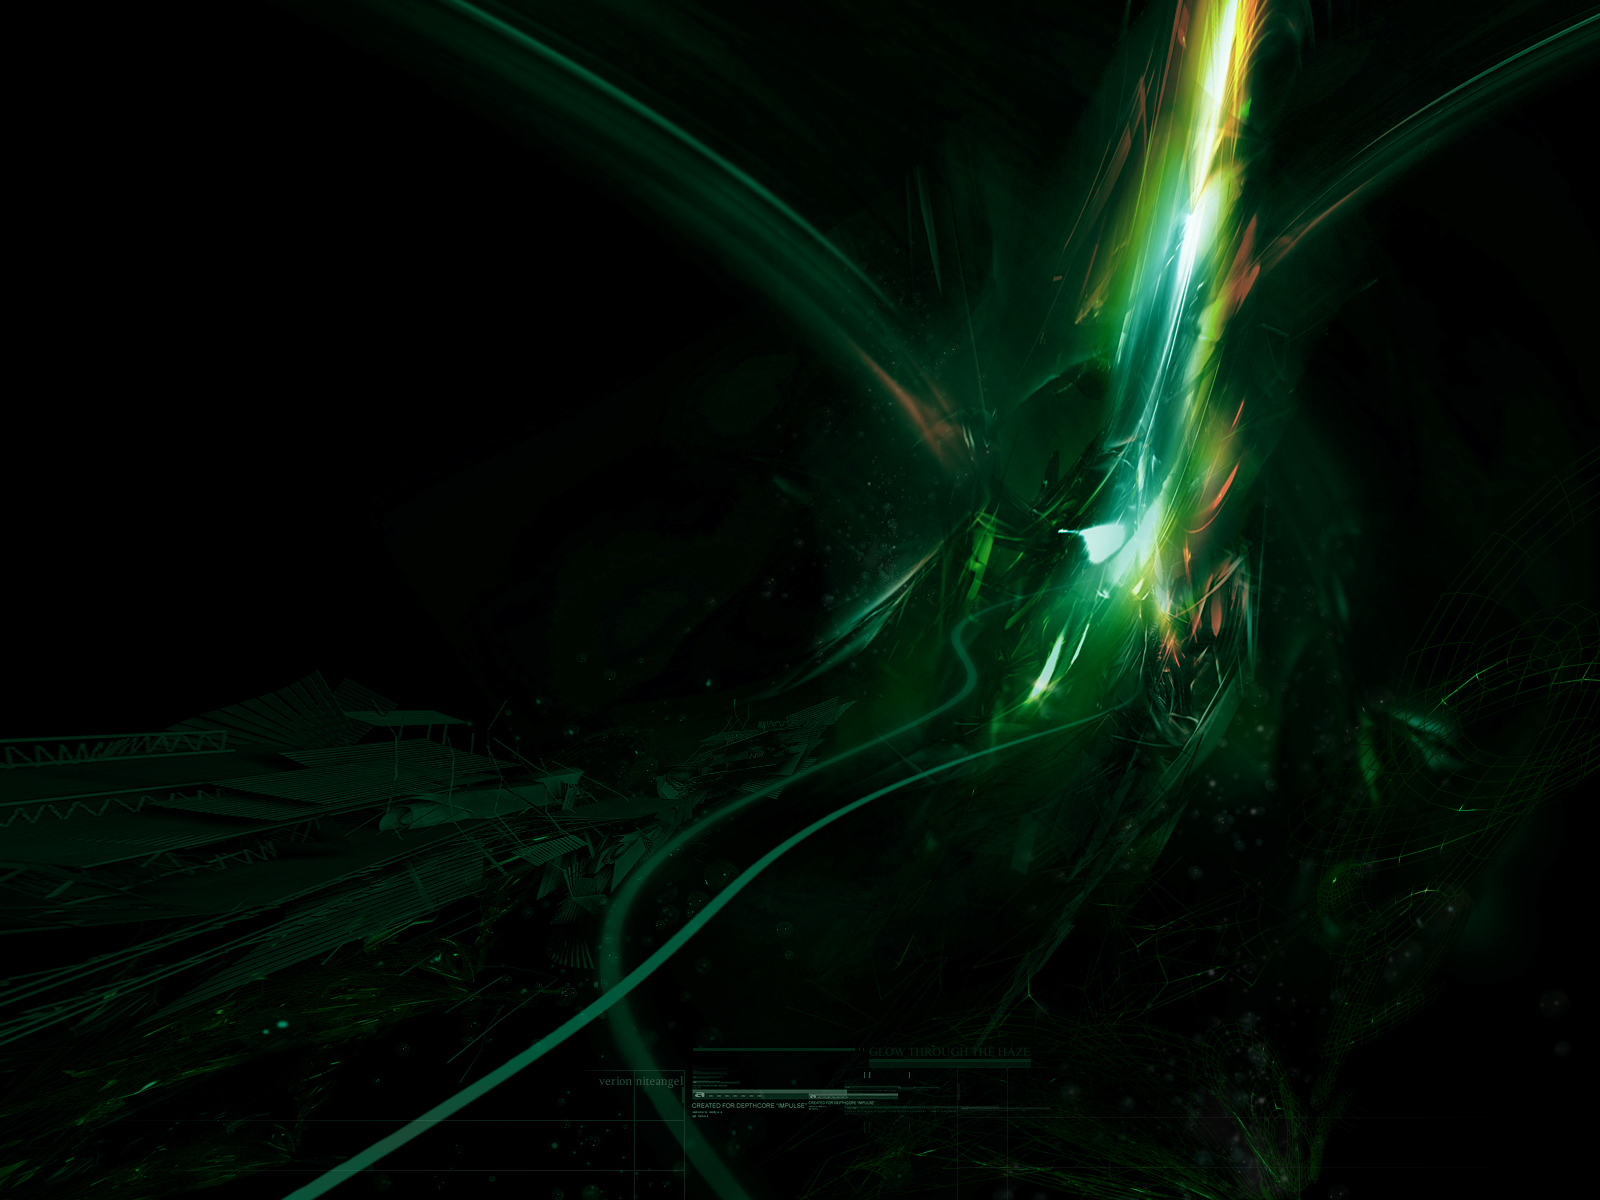 Dark Green Abstract Backgrounds Image Gallery on postimgscom